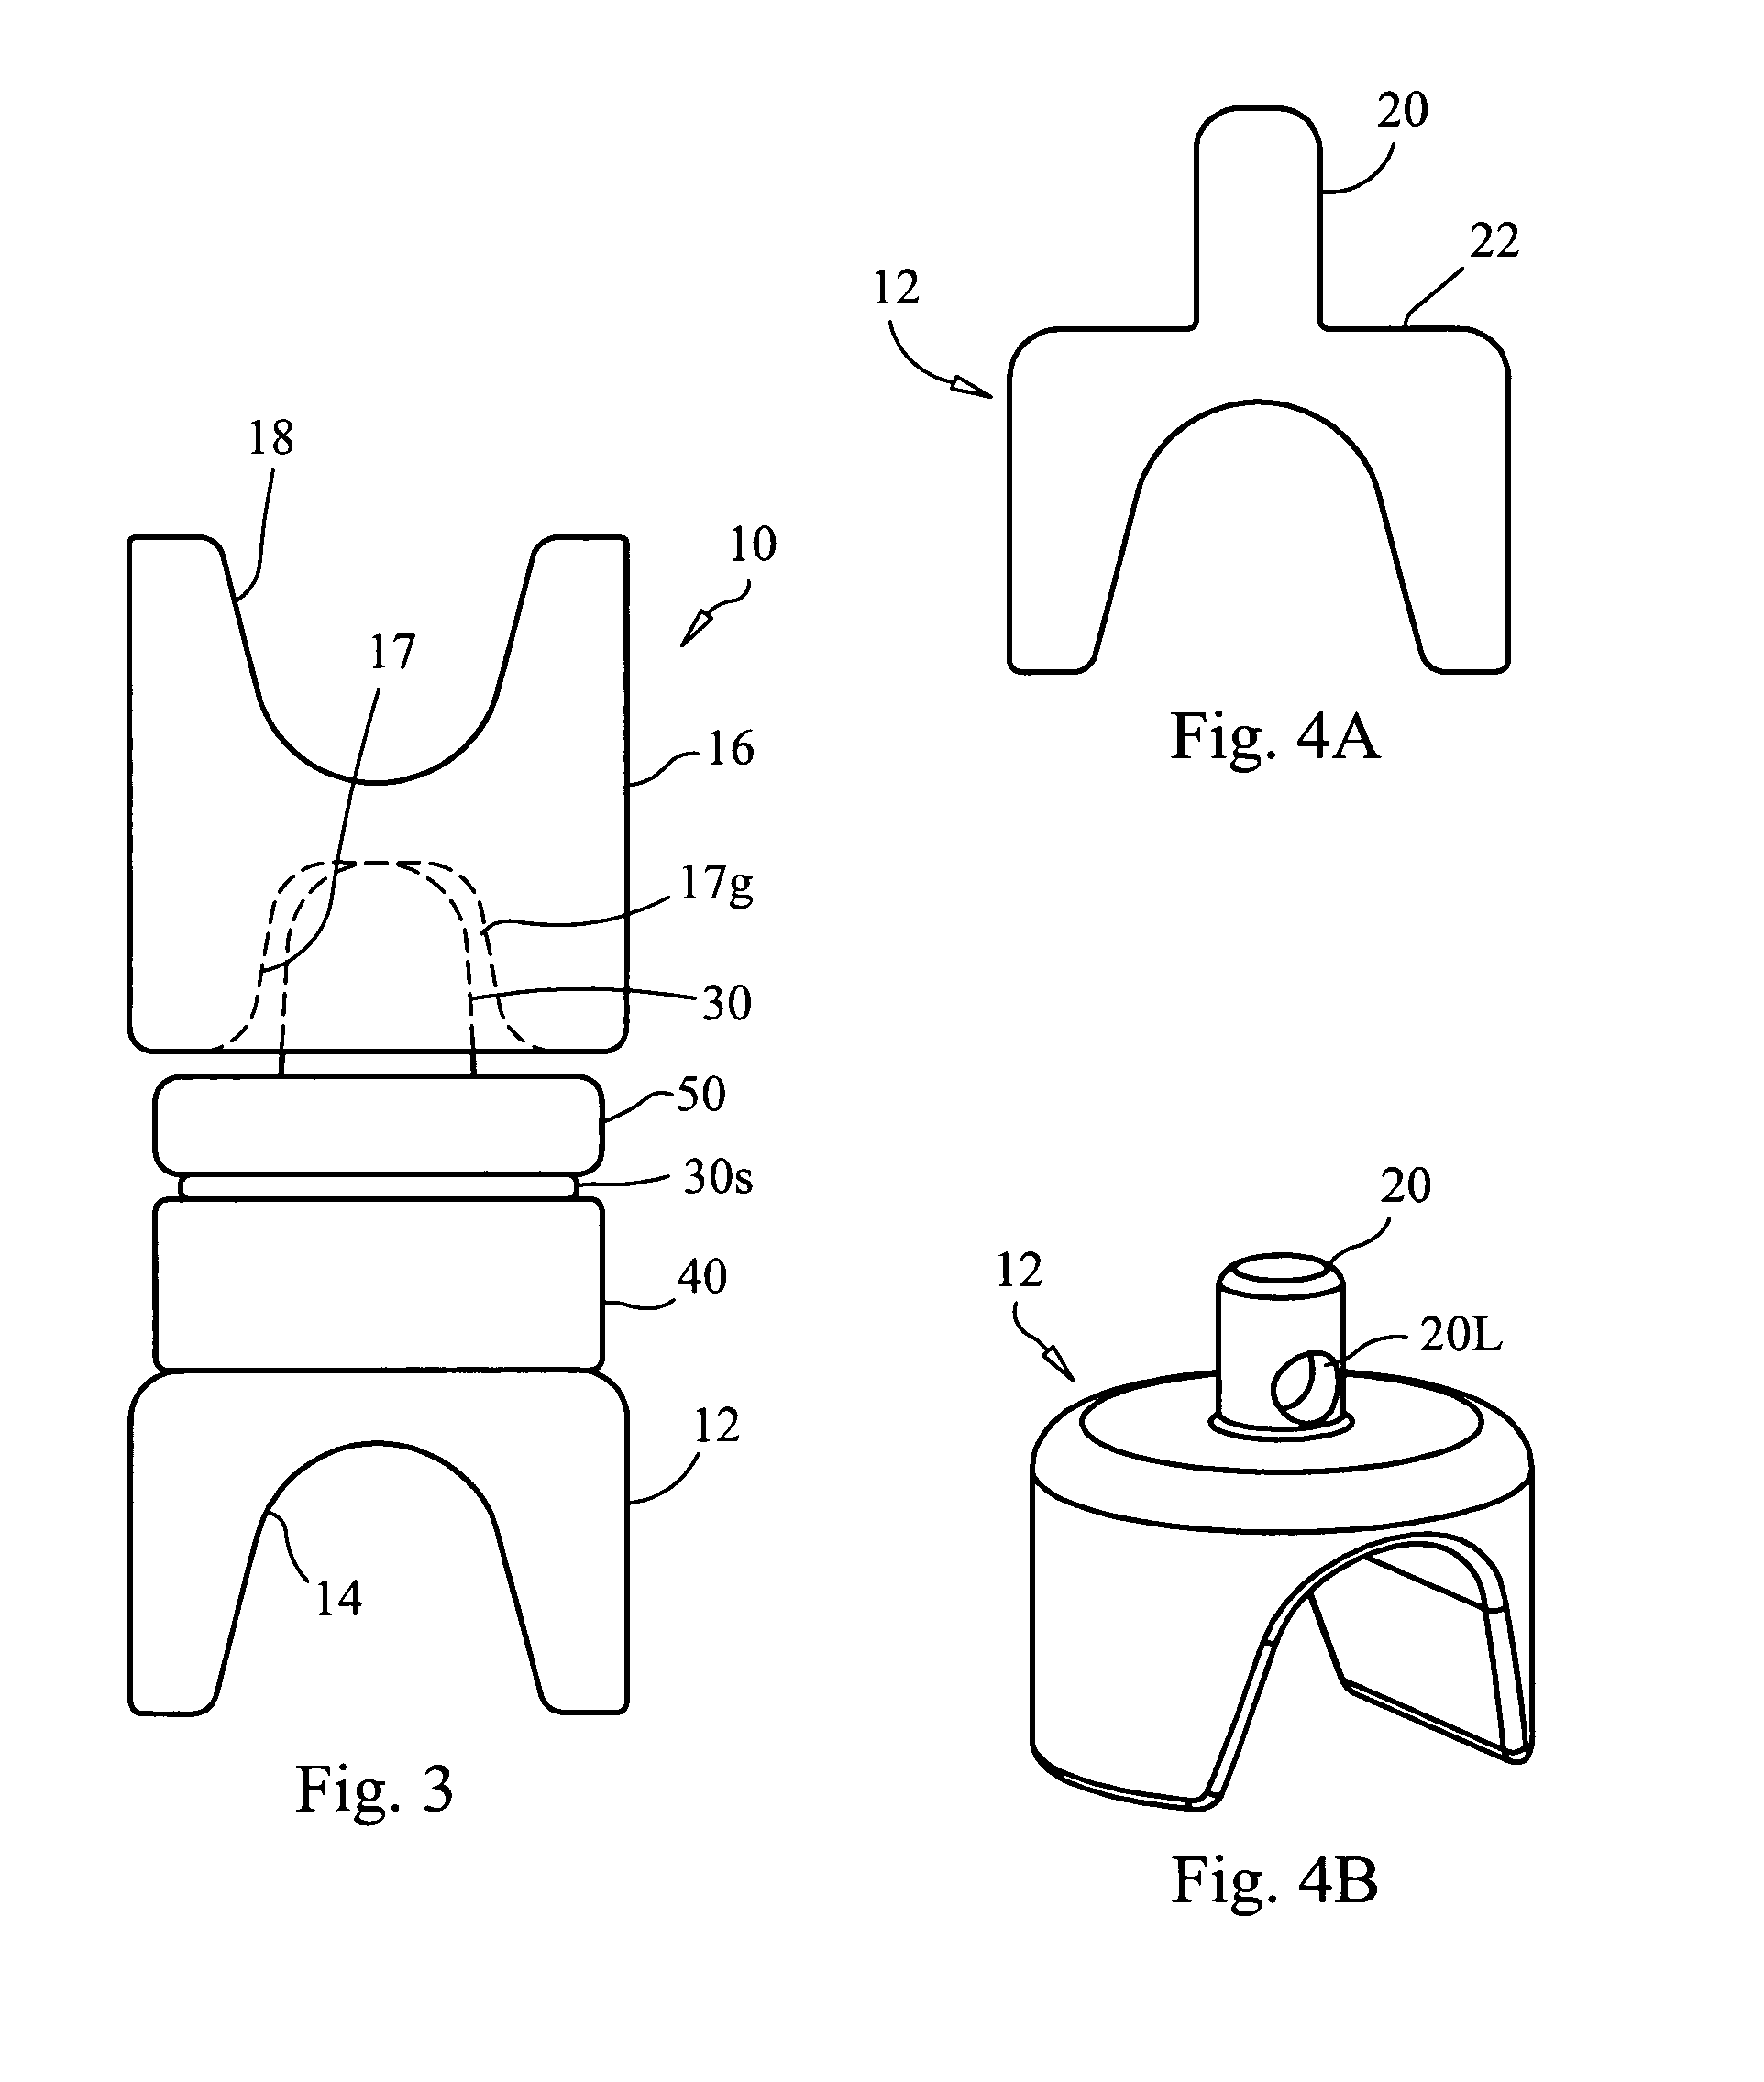 Interspinous dynamic stabilization implant and method of implanting